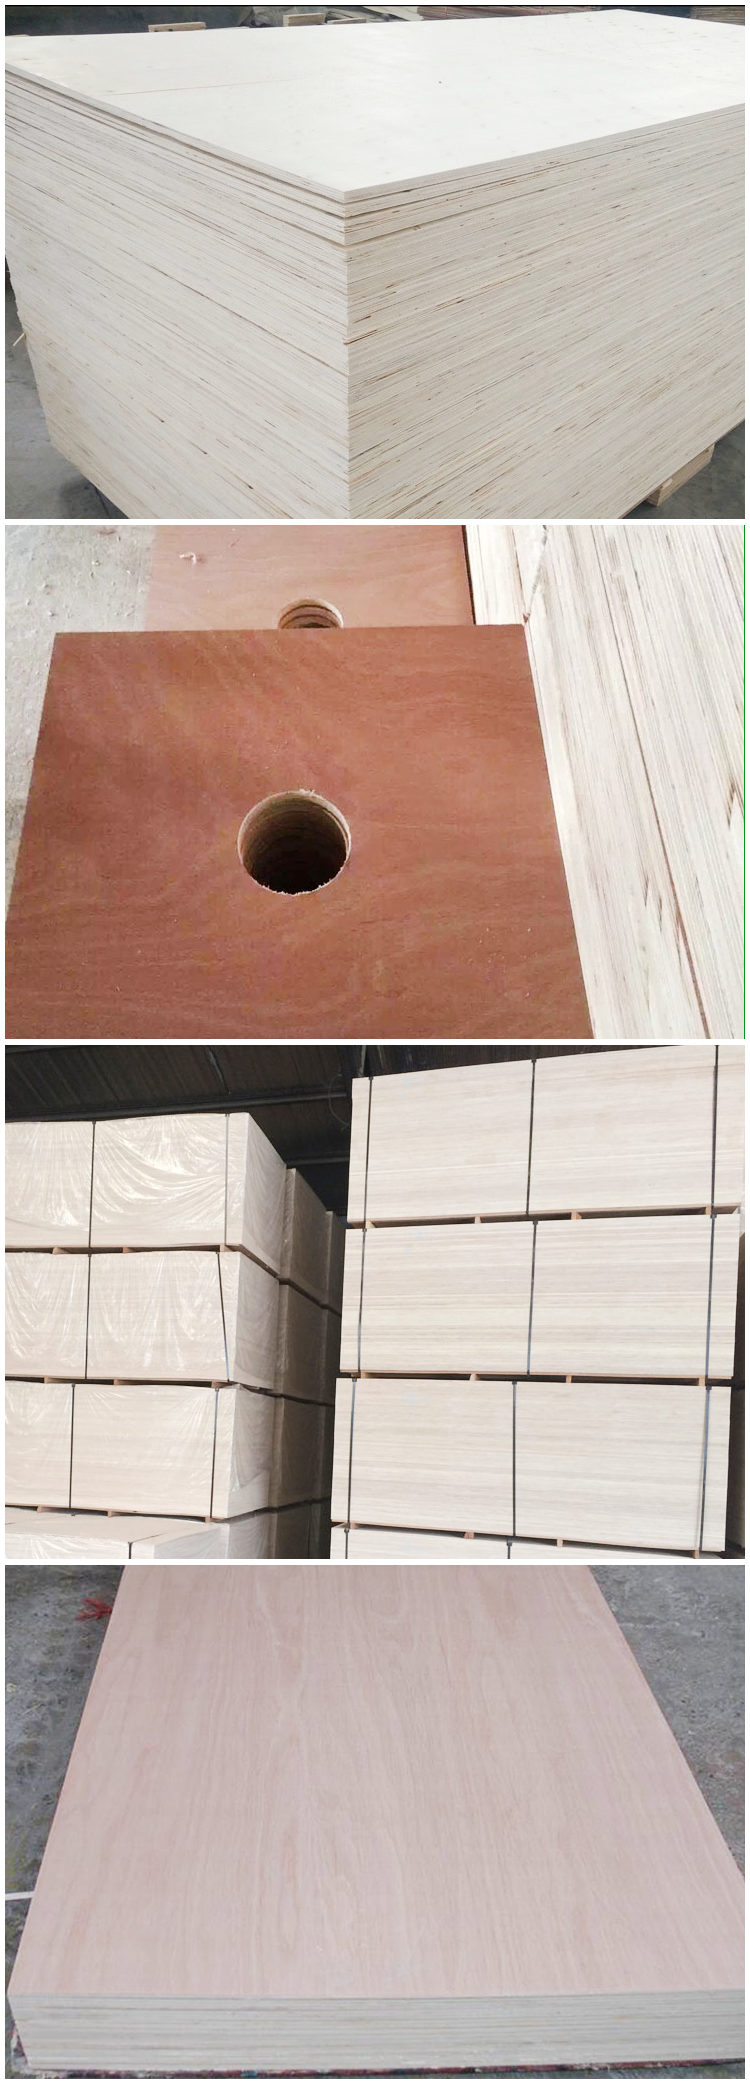 packing commercial plywood E2 glue plywood(图2)